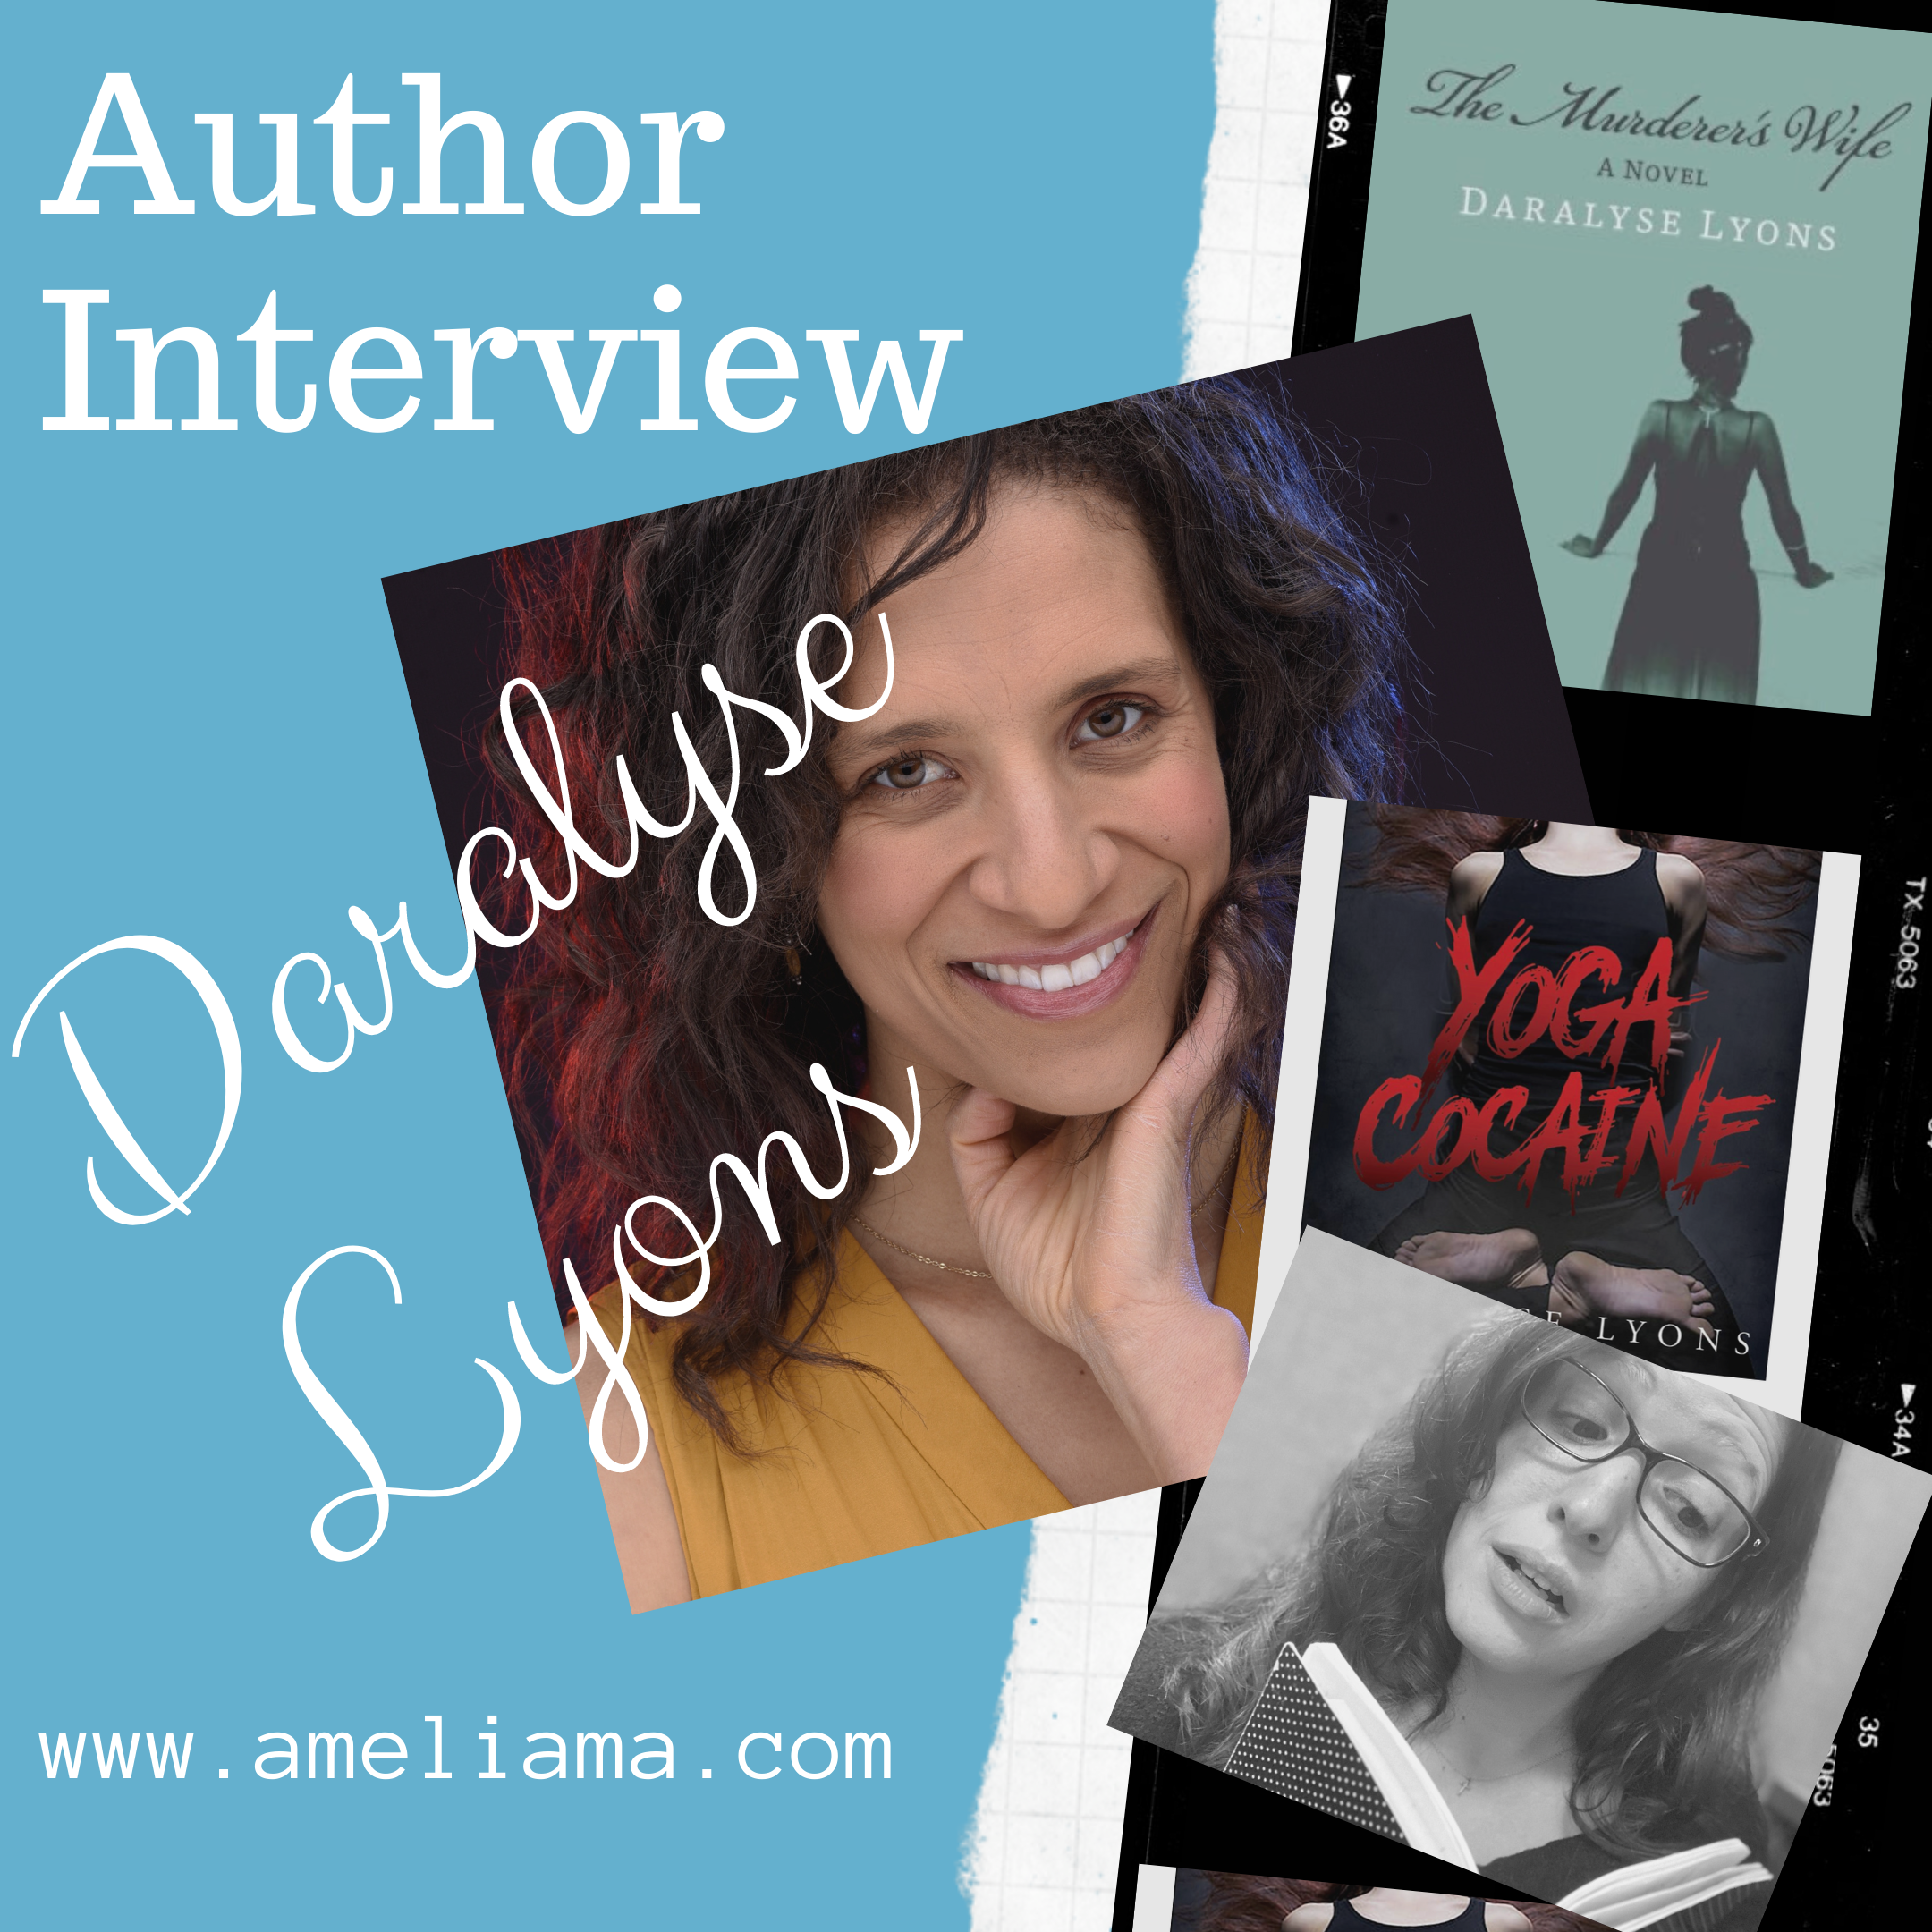 Meet the author, Daralyse Lyons, writer of fiction, non-fiction, memoirs and articles.